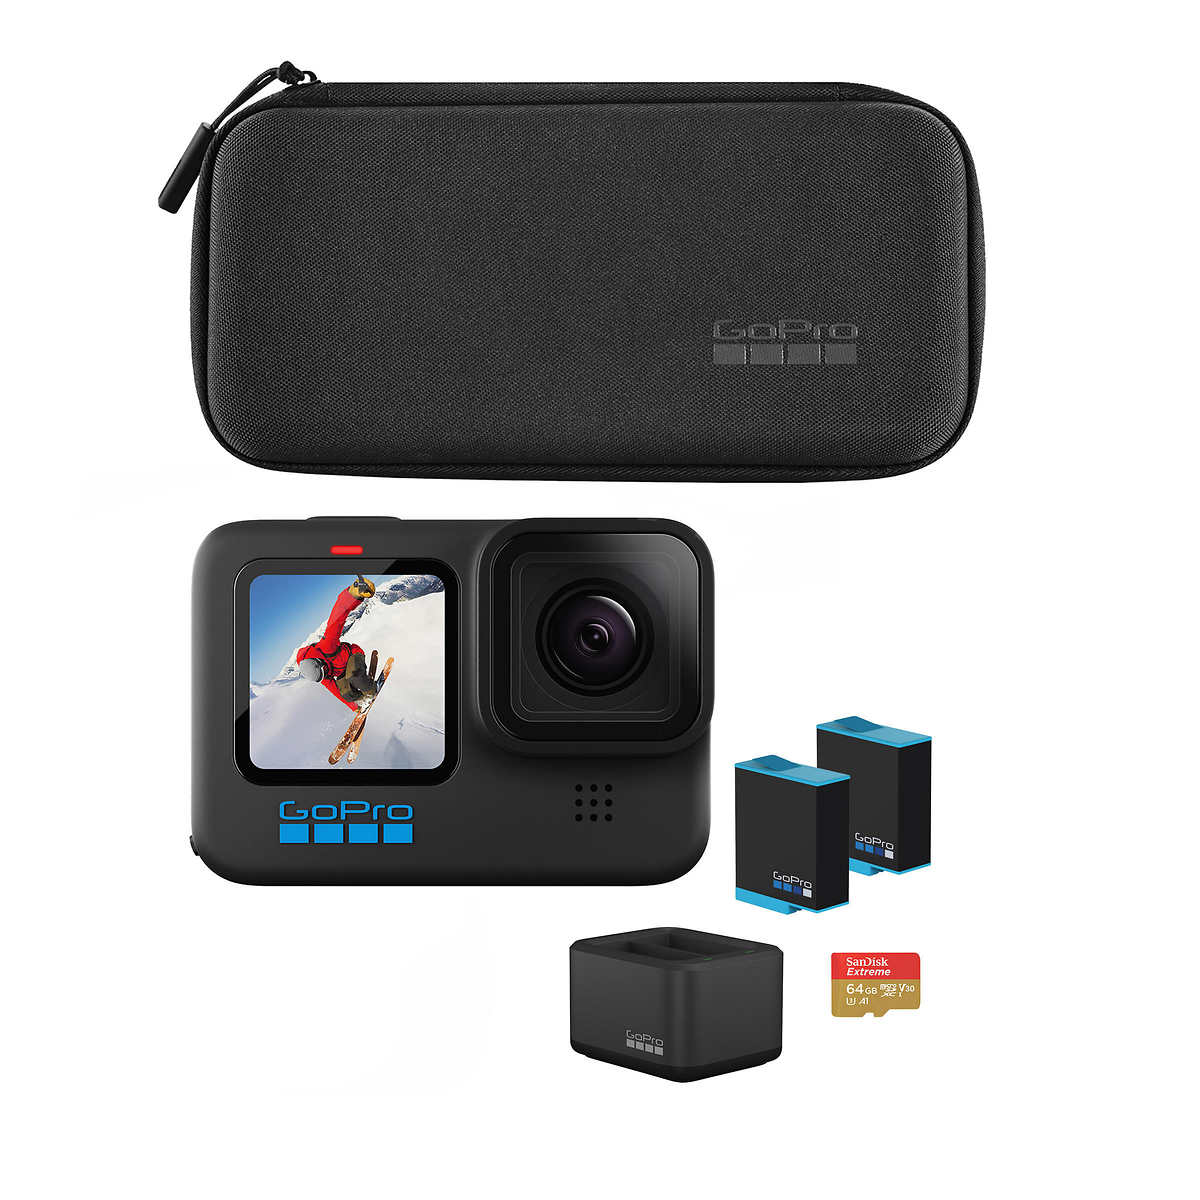 GoPro Packs More of Everything into New HERO9 Black